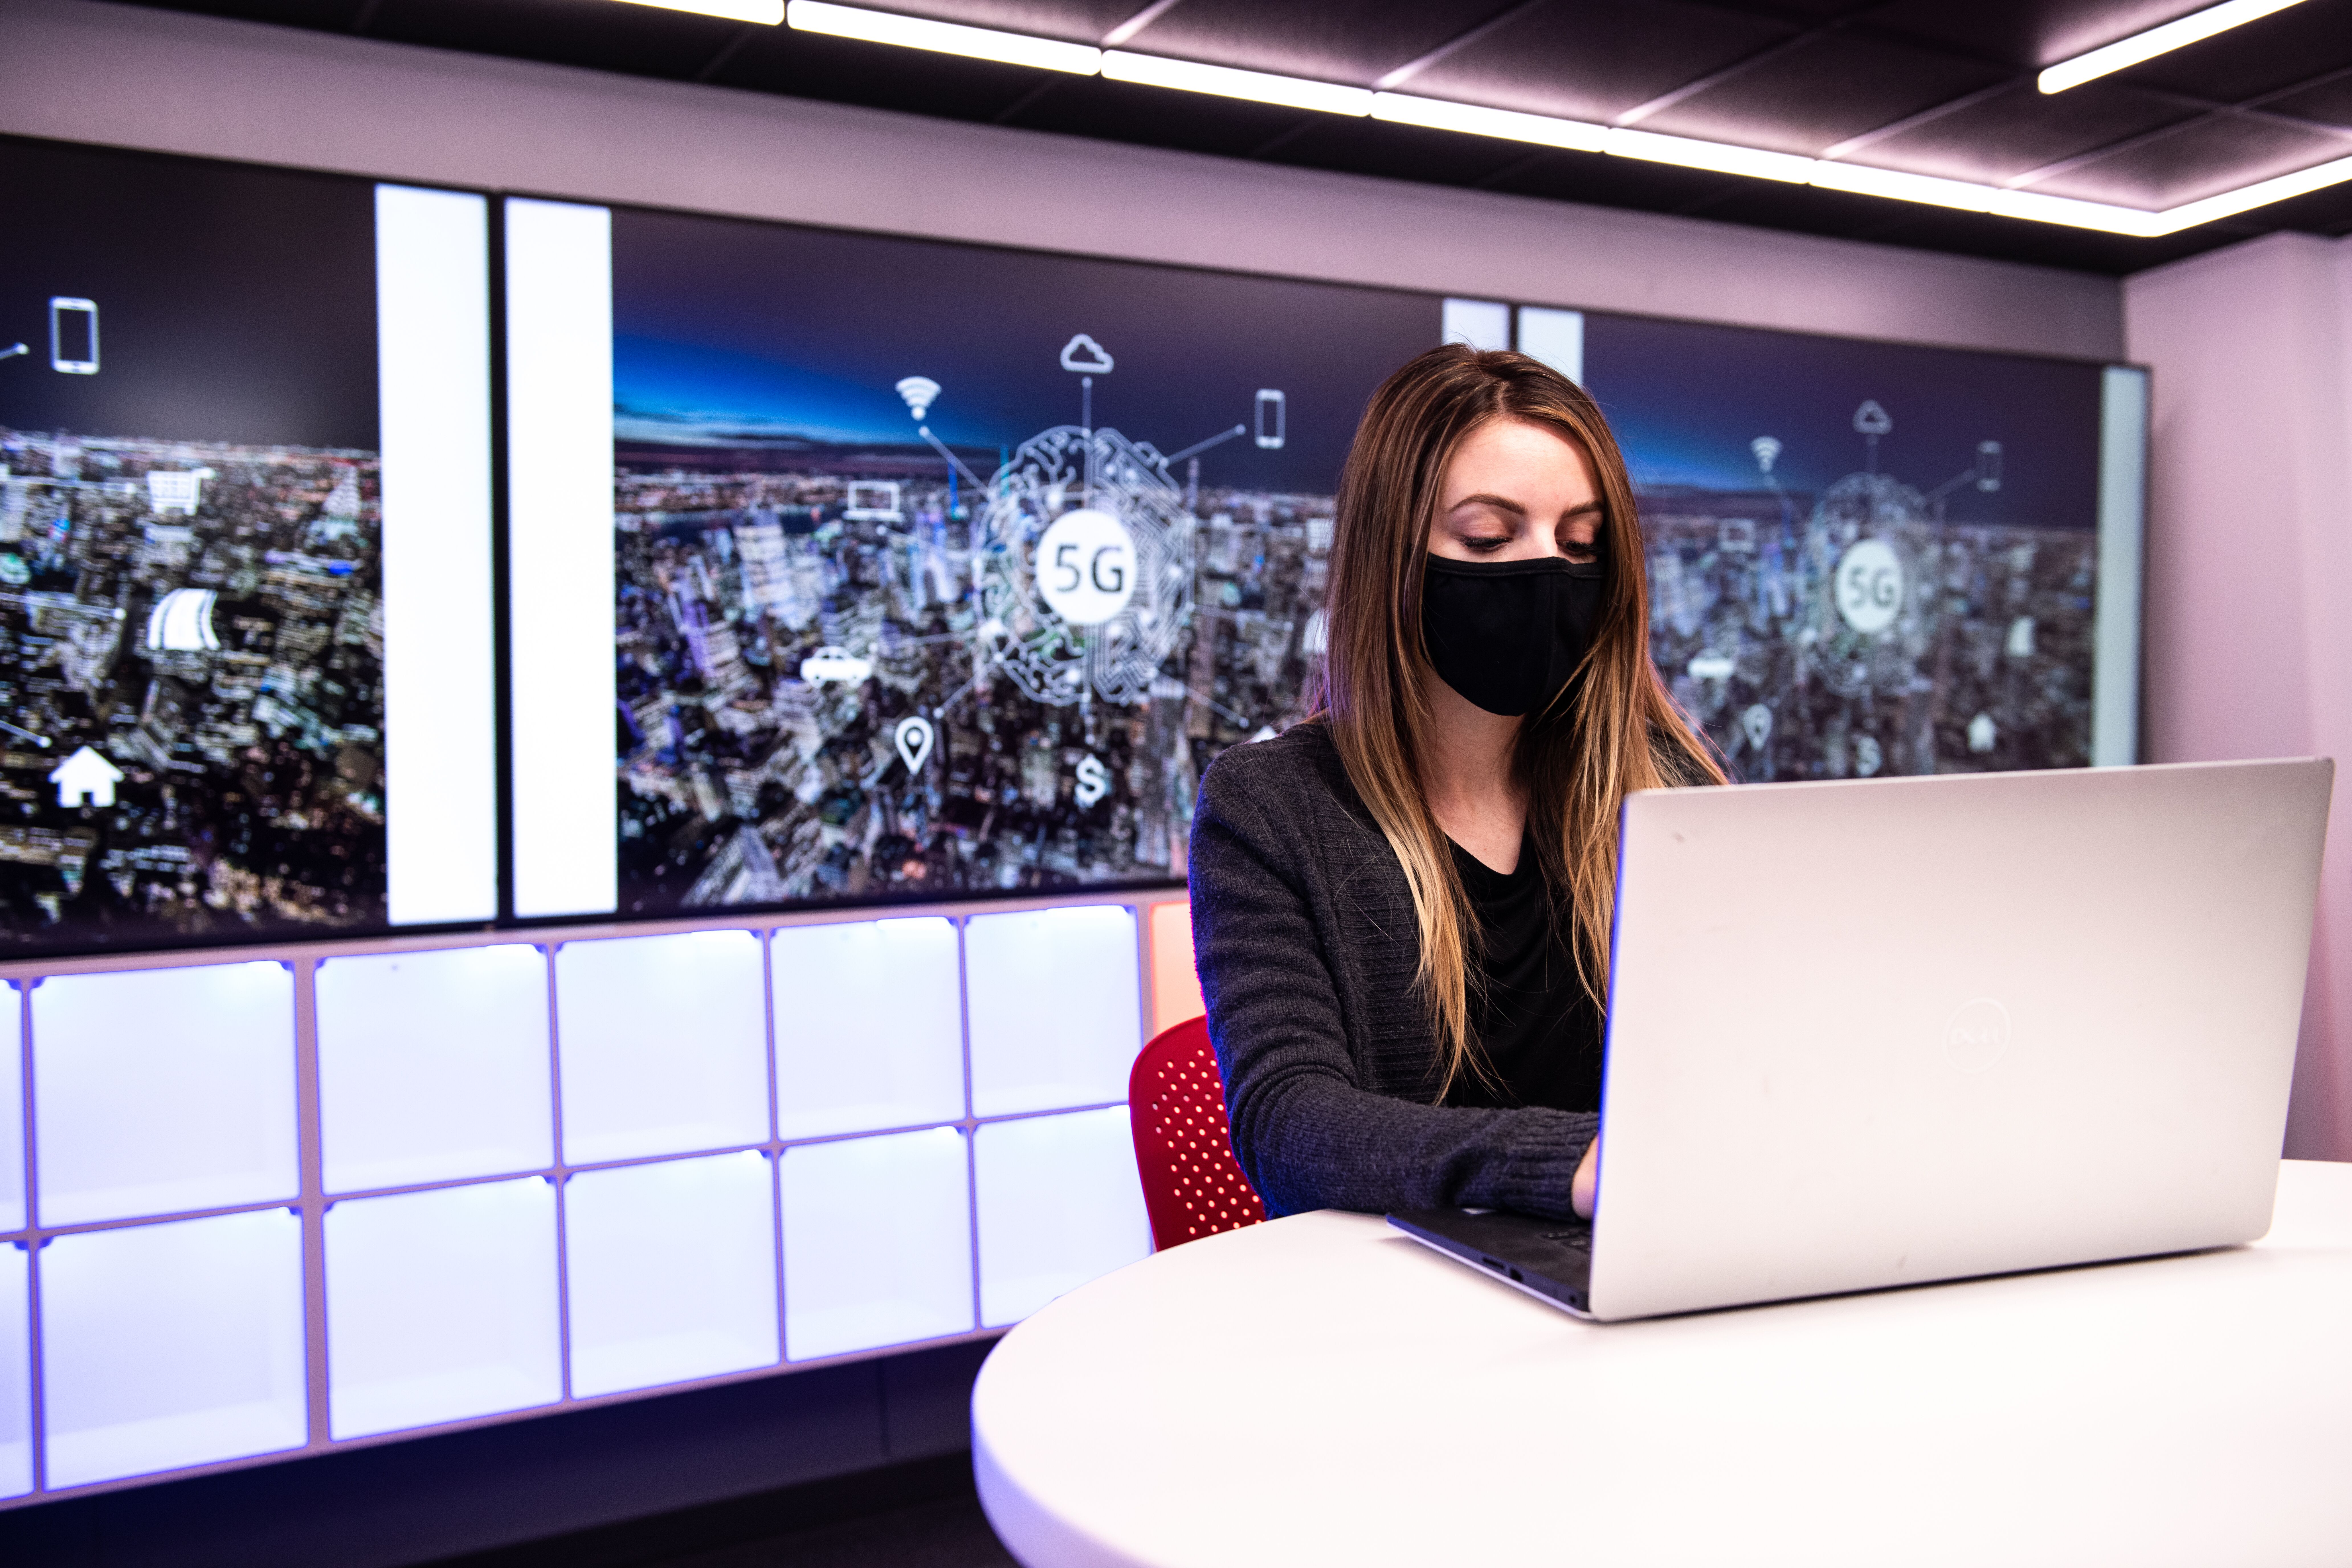 Torri Simmons and her colleagues use the capabilities of PNNL’s 5G Innovation Studio to explore how 5G can transform diverse mission areas, including port and border security, grid infrastructure engagement, and augmented human-machine teaming capabilities for first responders. 